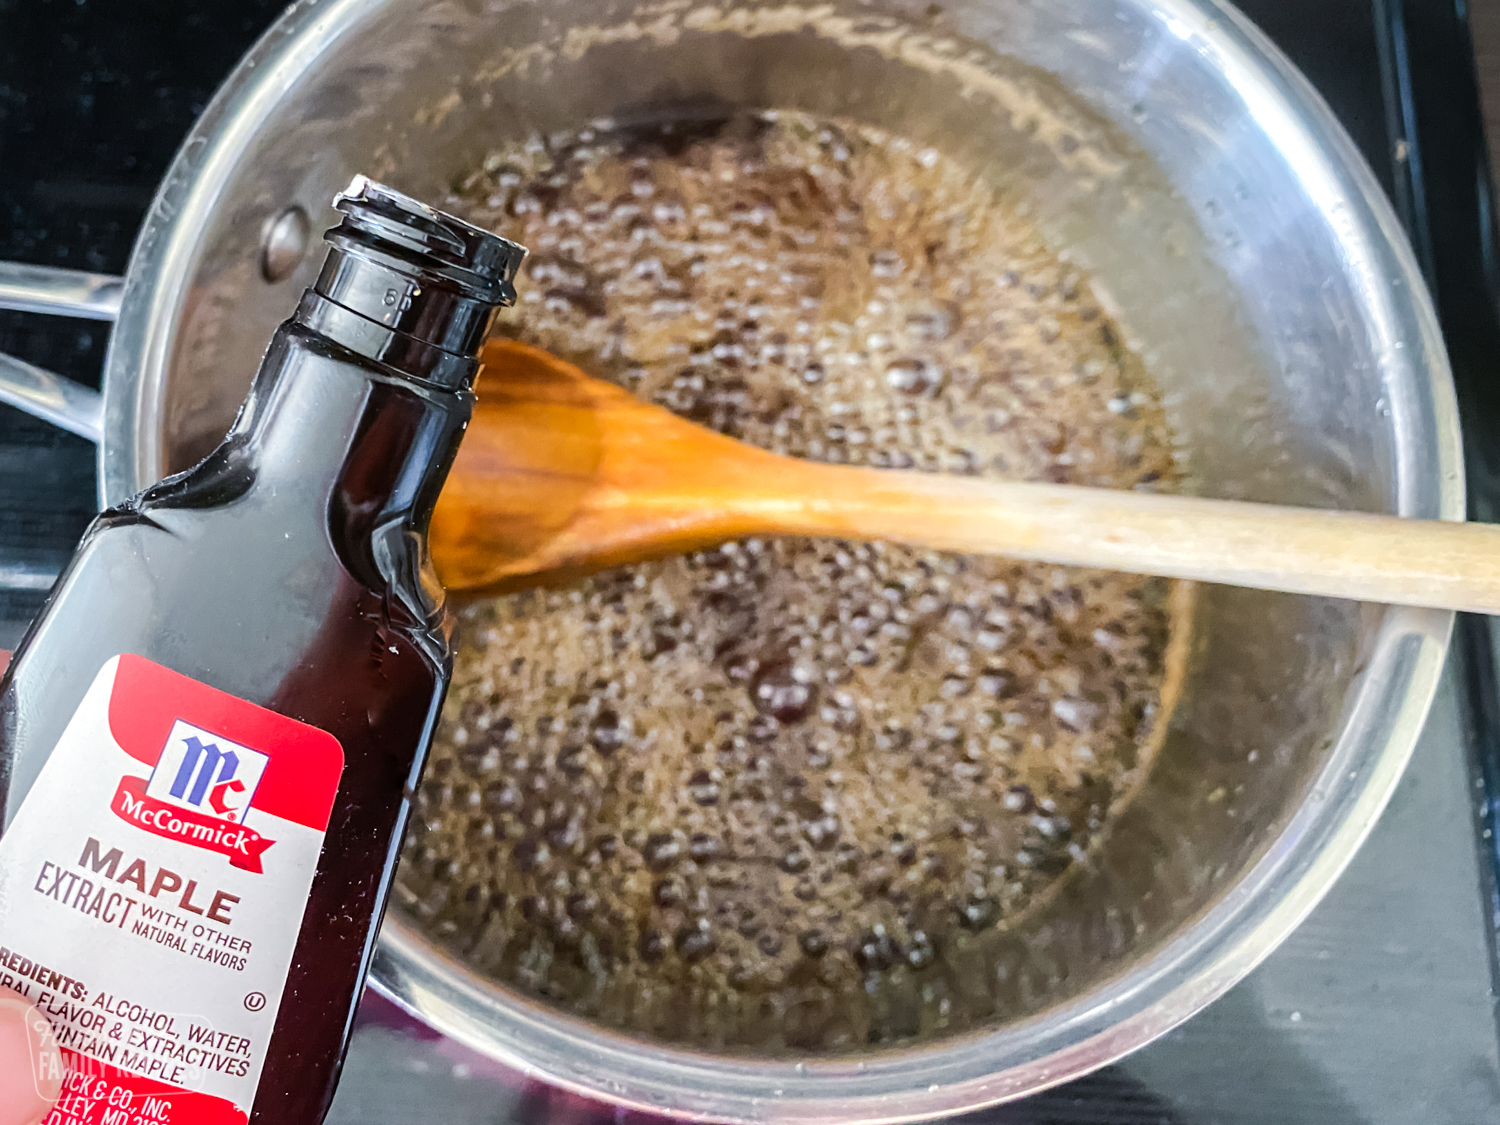 Maple extract being poured into a sauce pan with homemade maple syrup